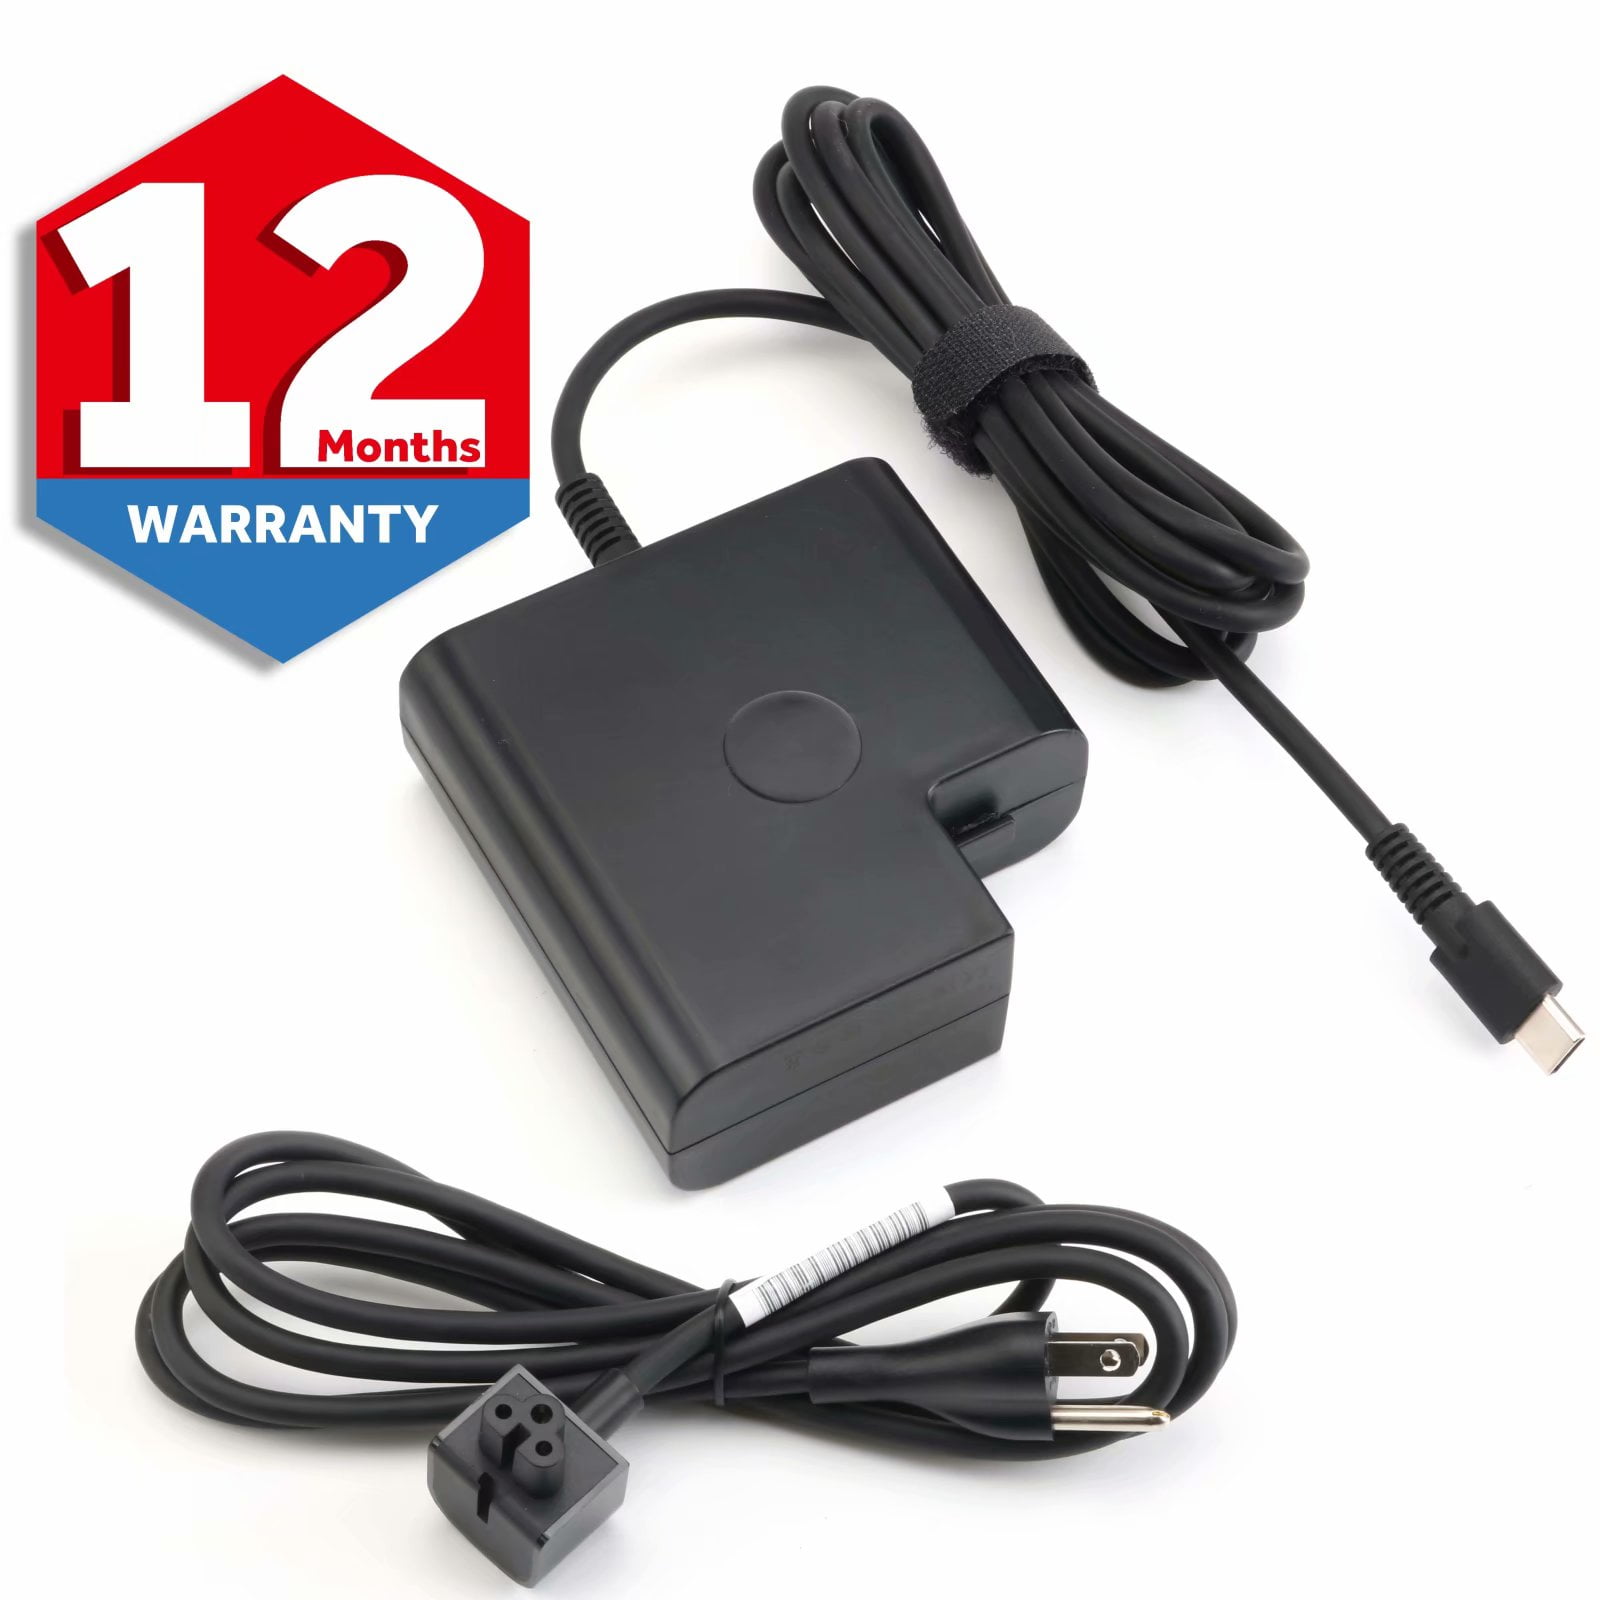 65W USB C Adapter Charger for Dell Latitude 12 5285 5289 5290 7212 7275  7285 7290 5175 5179 5280 3160, XPS 13 9350 9360 9365 9370 Type C Laptop Power  Supply Adapter Cord 